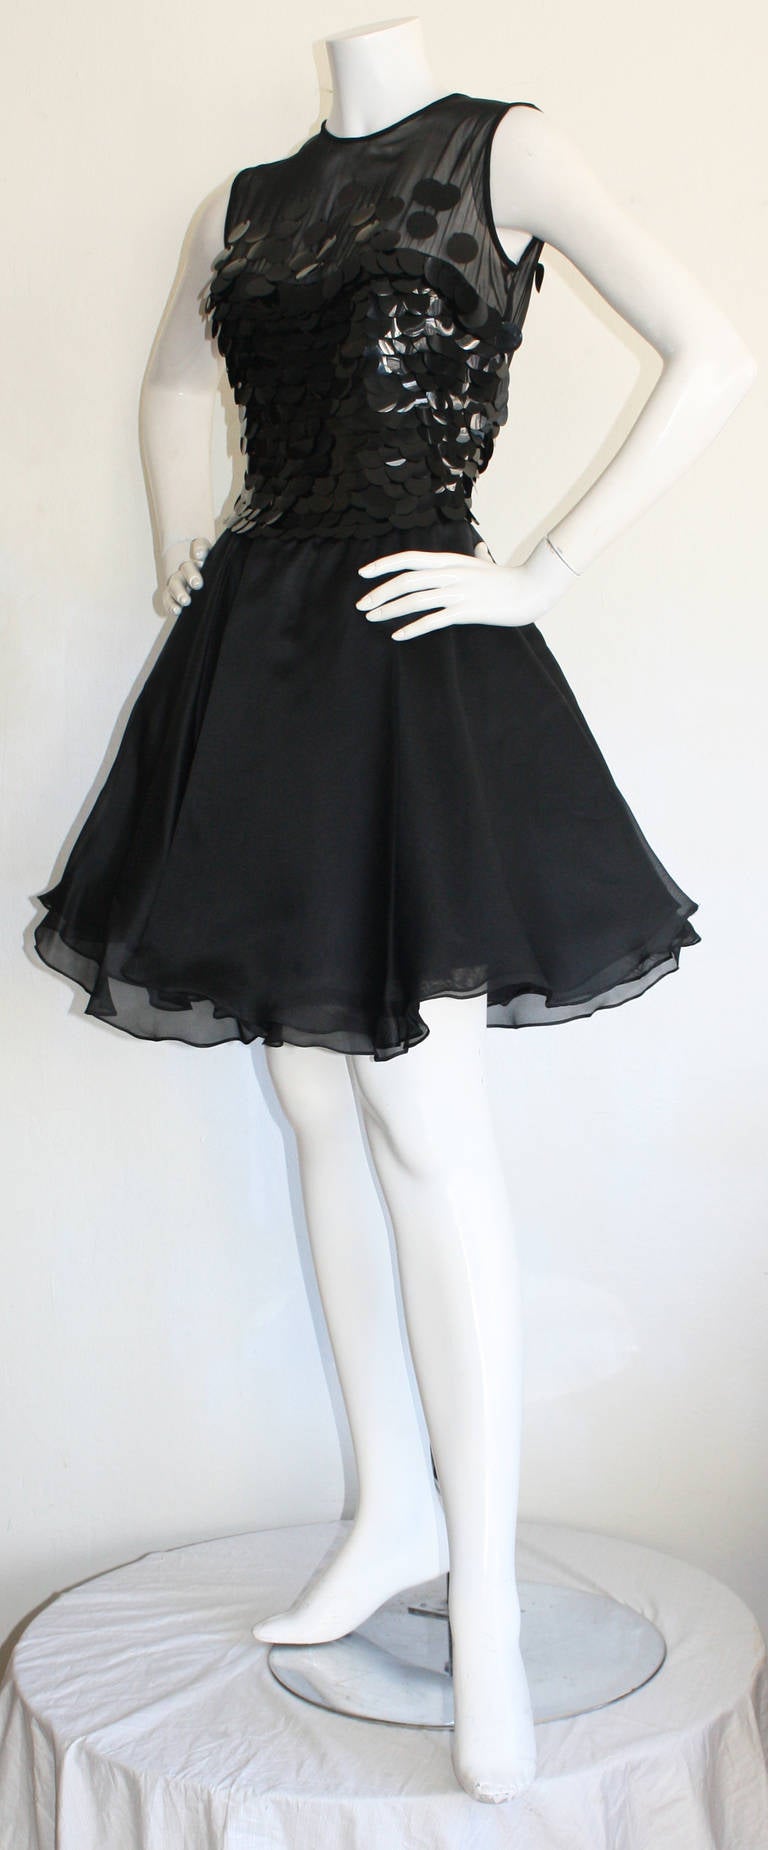 Simply stunning vintage disc dress by CD Greene! The perfect little black dress!!! Features black disc sequins, with sweetheart neckline on semi sheer silk. Skirt features layers and layers of black chiffon, with built in crinoline. Sexy peek-a-boo